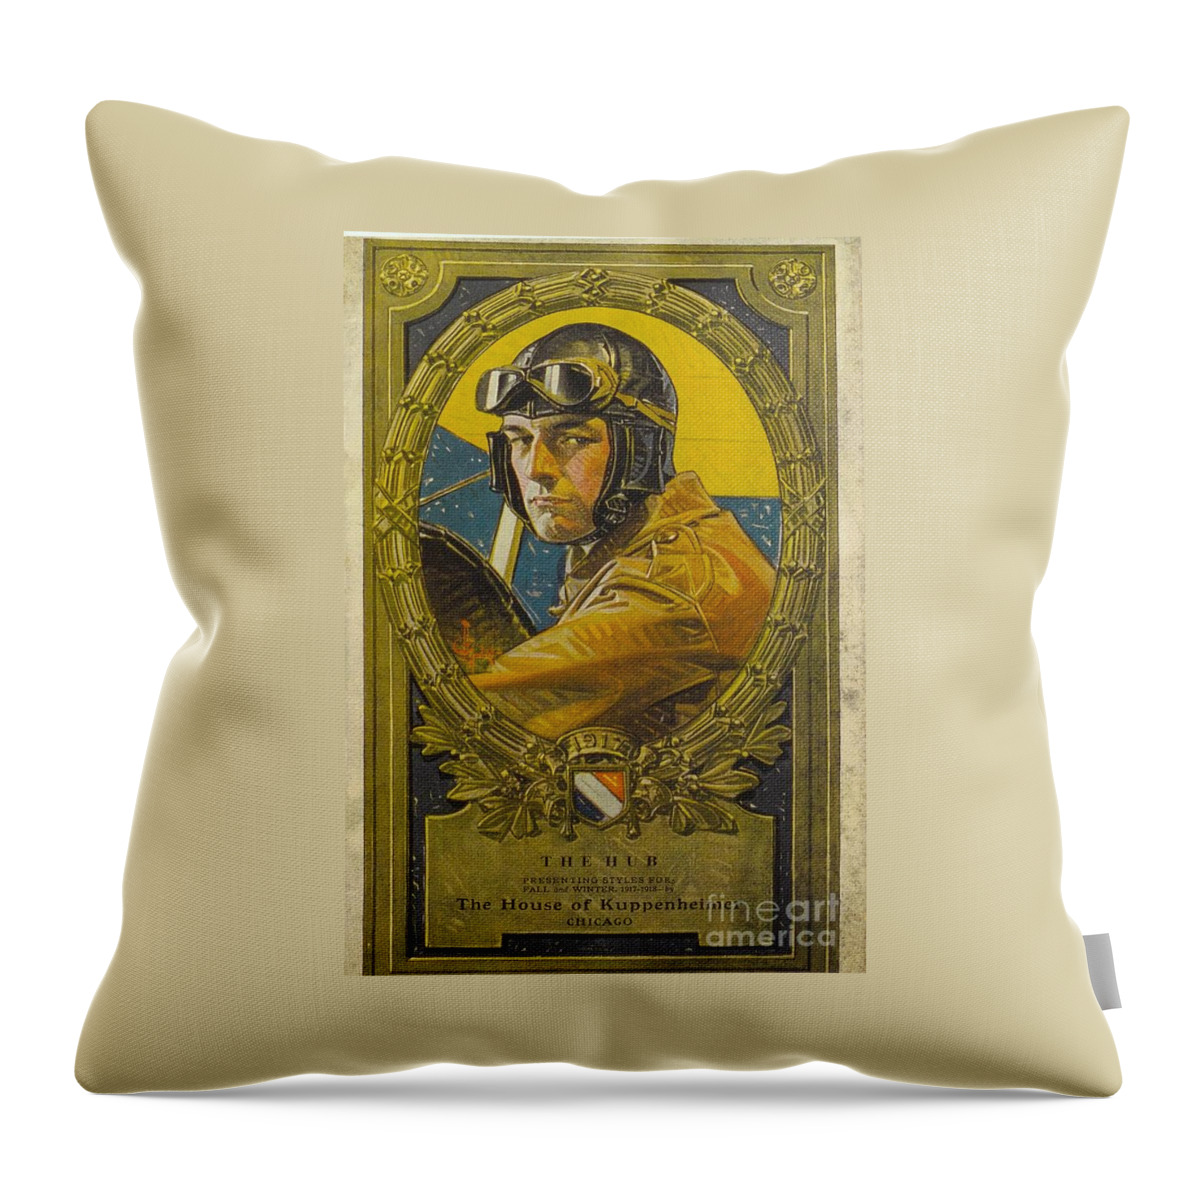 Joseph Christian Leyendecker Throw Pillow featuring the painting Pilot by MotionAge Designs